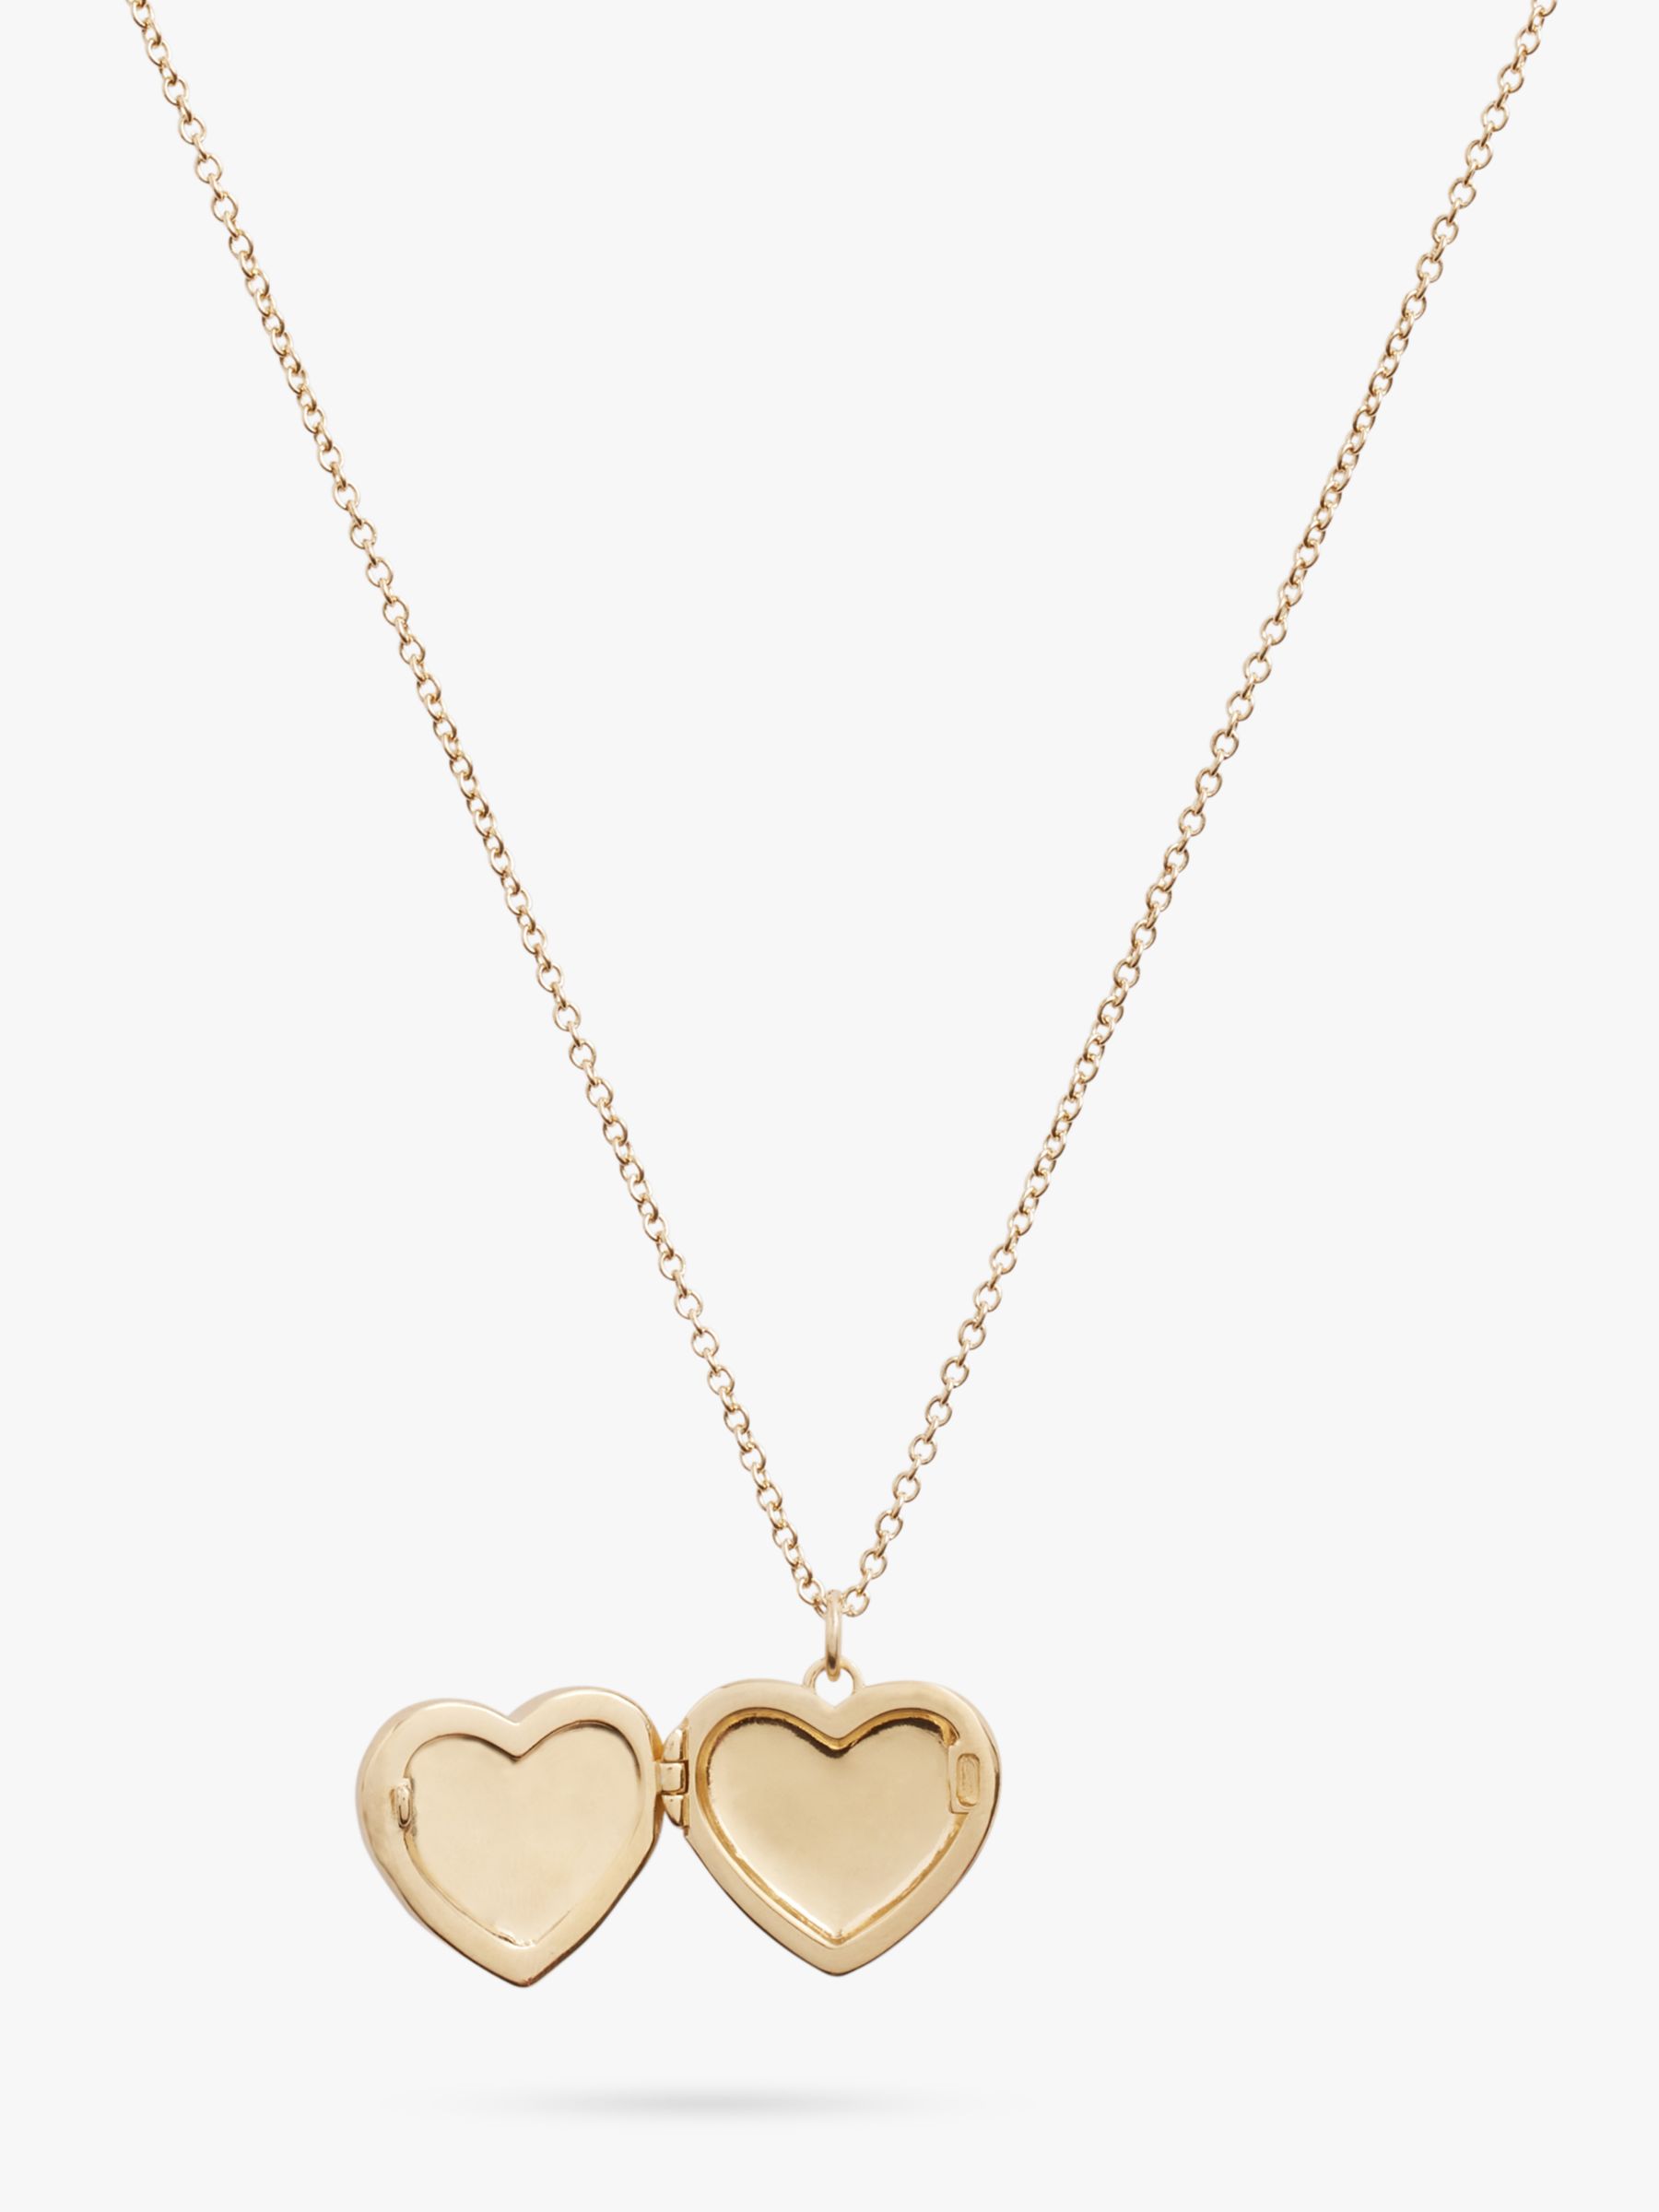 Buy Coach Enamel and Crystal Heart Locket Necklace Online at johnlewis.com